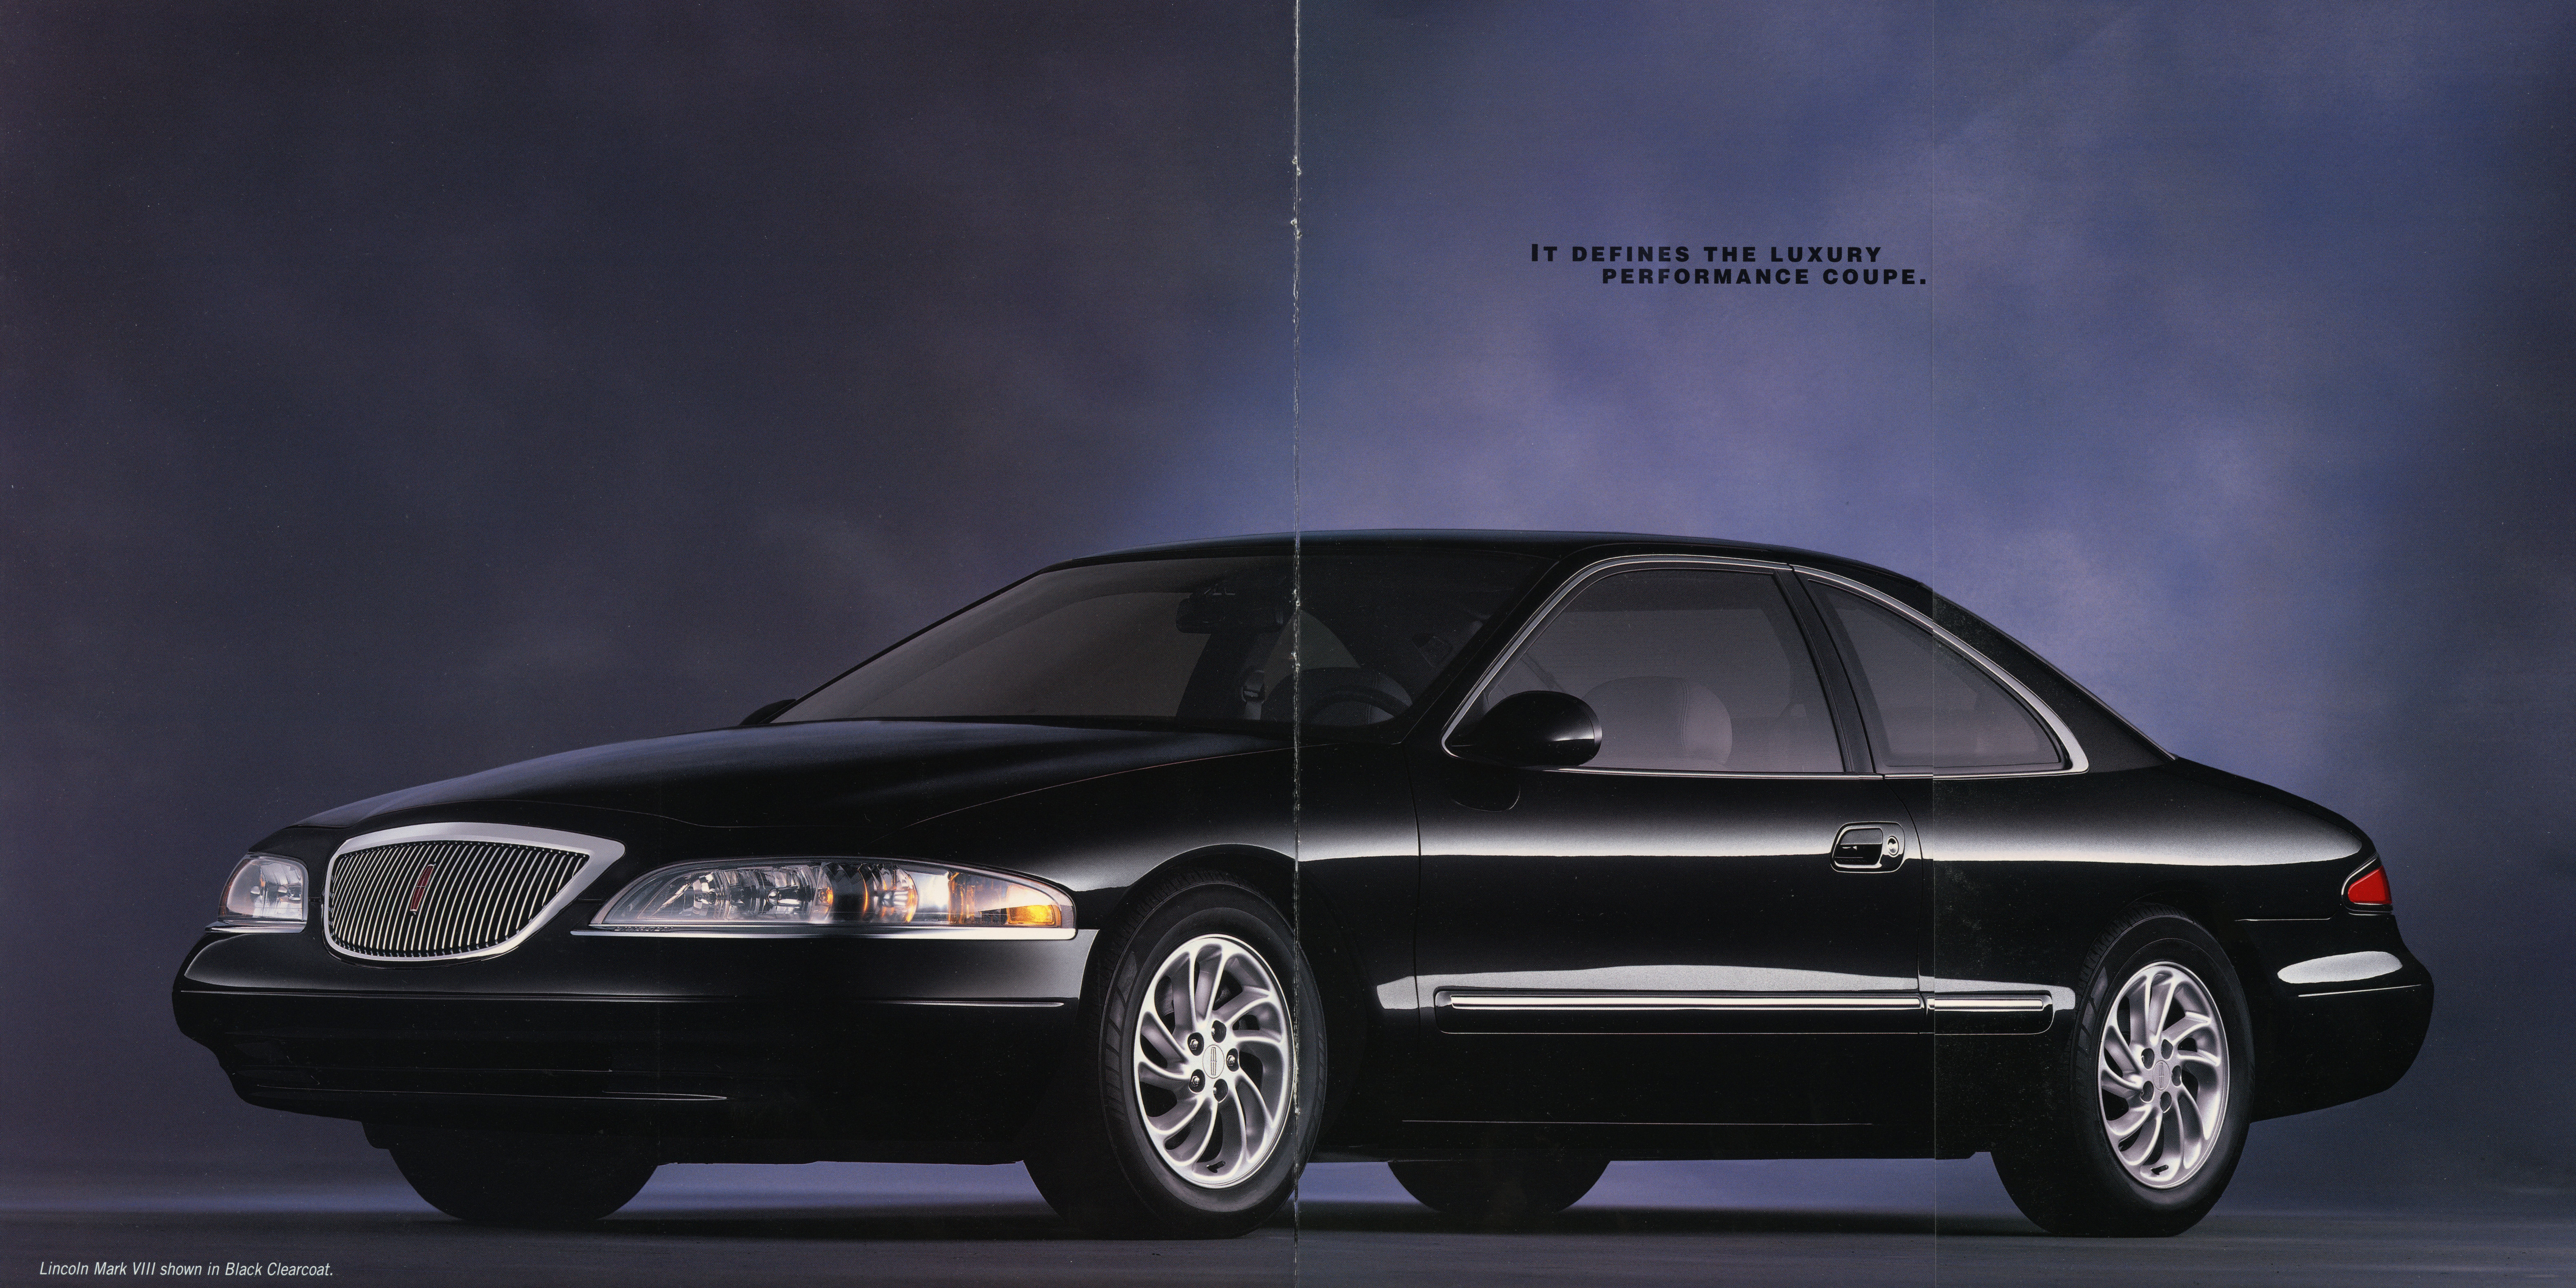 1998LincolnMarkVIII-Page5-6